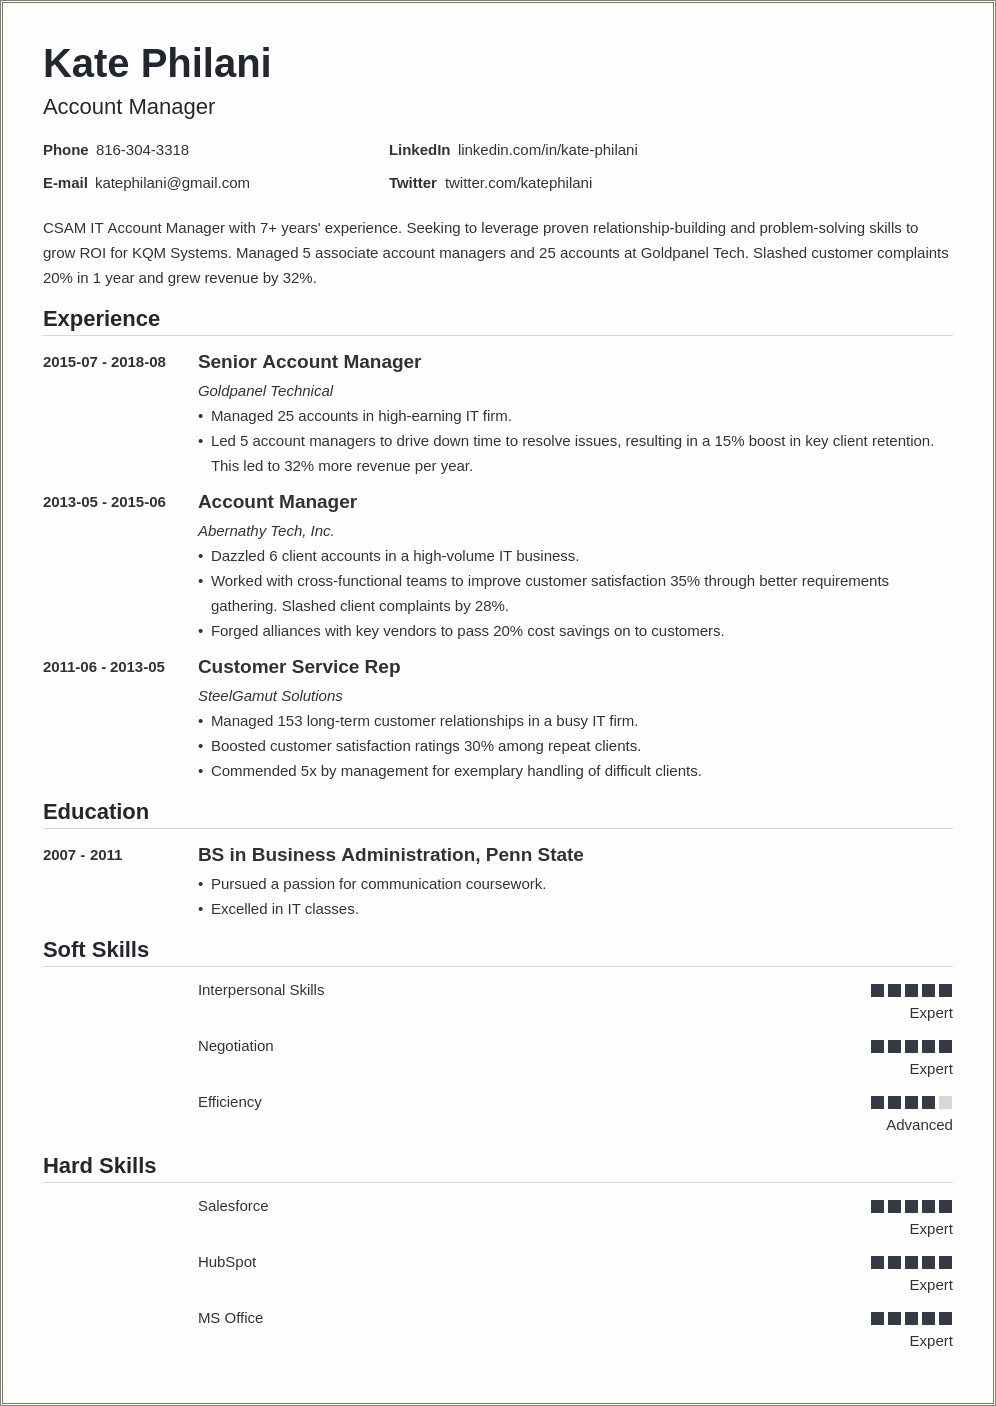 Resume Skill Descriptions For Account Manager